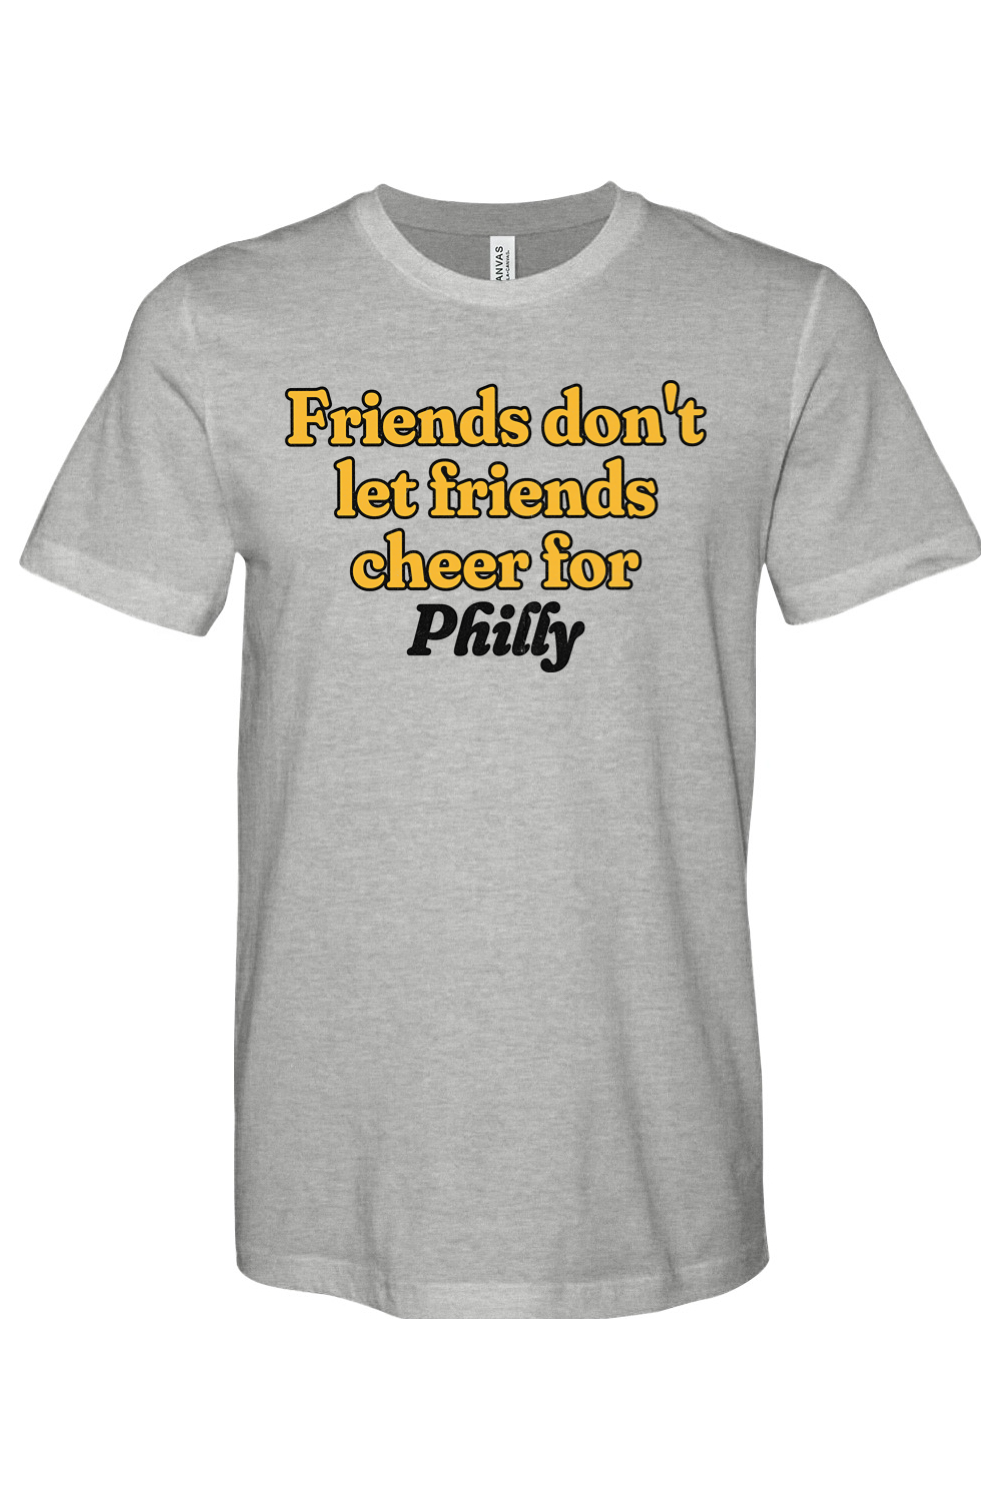 Friends Don't Let Friends Cheer for Philly - Yinzylvania